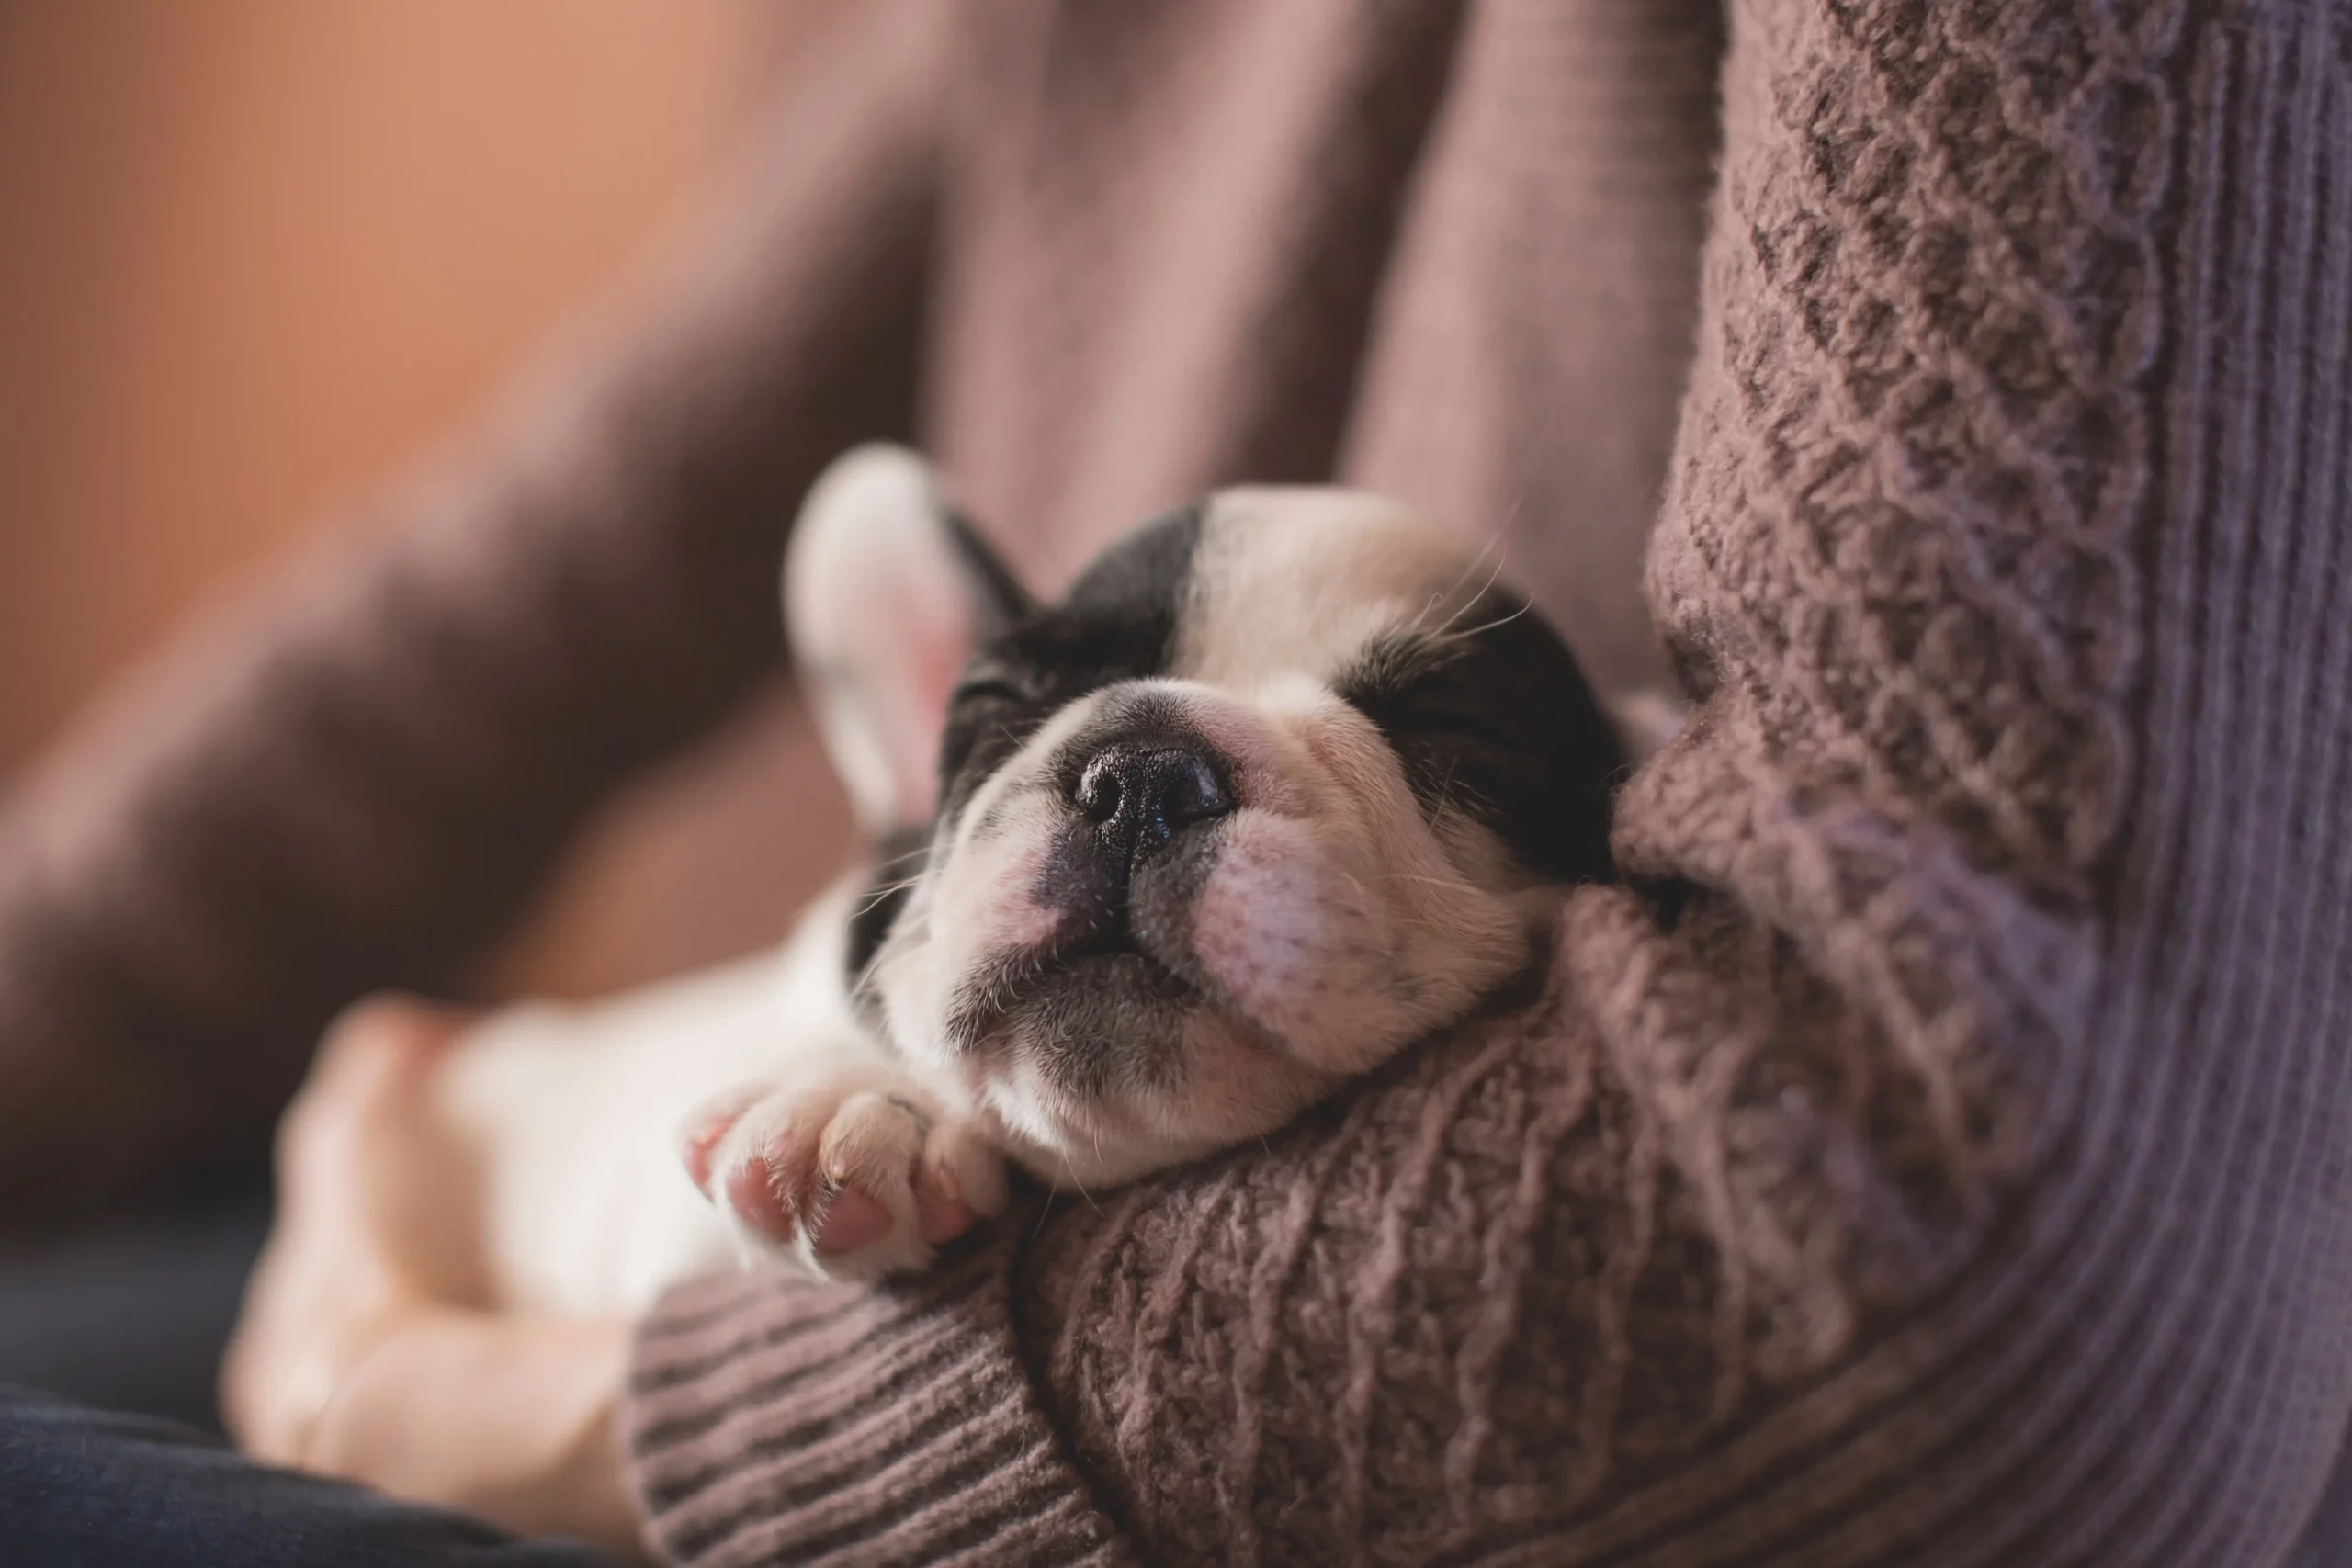 Sleeping puppy snuggled in a cozy knit sweater